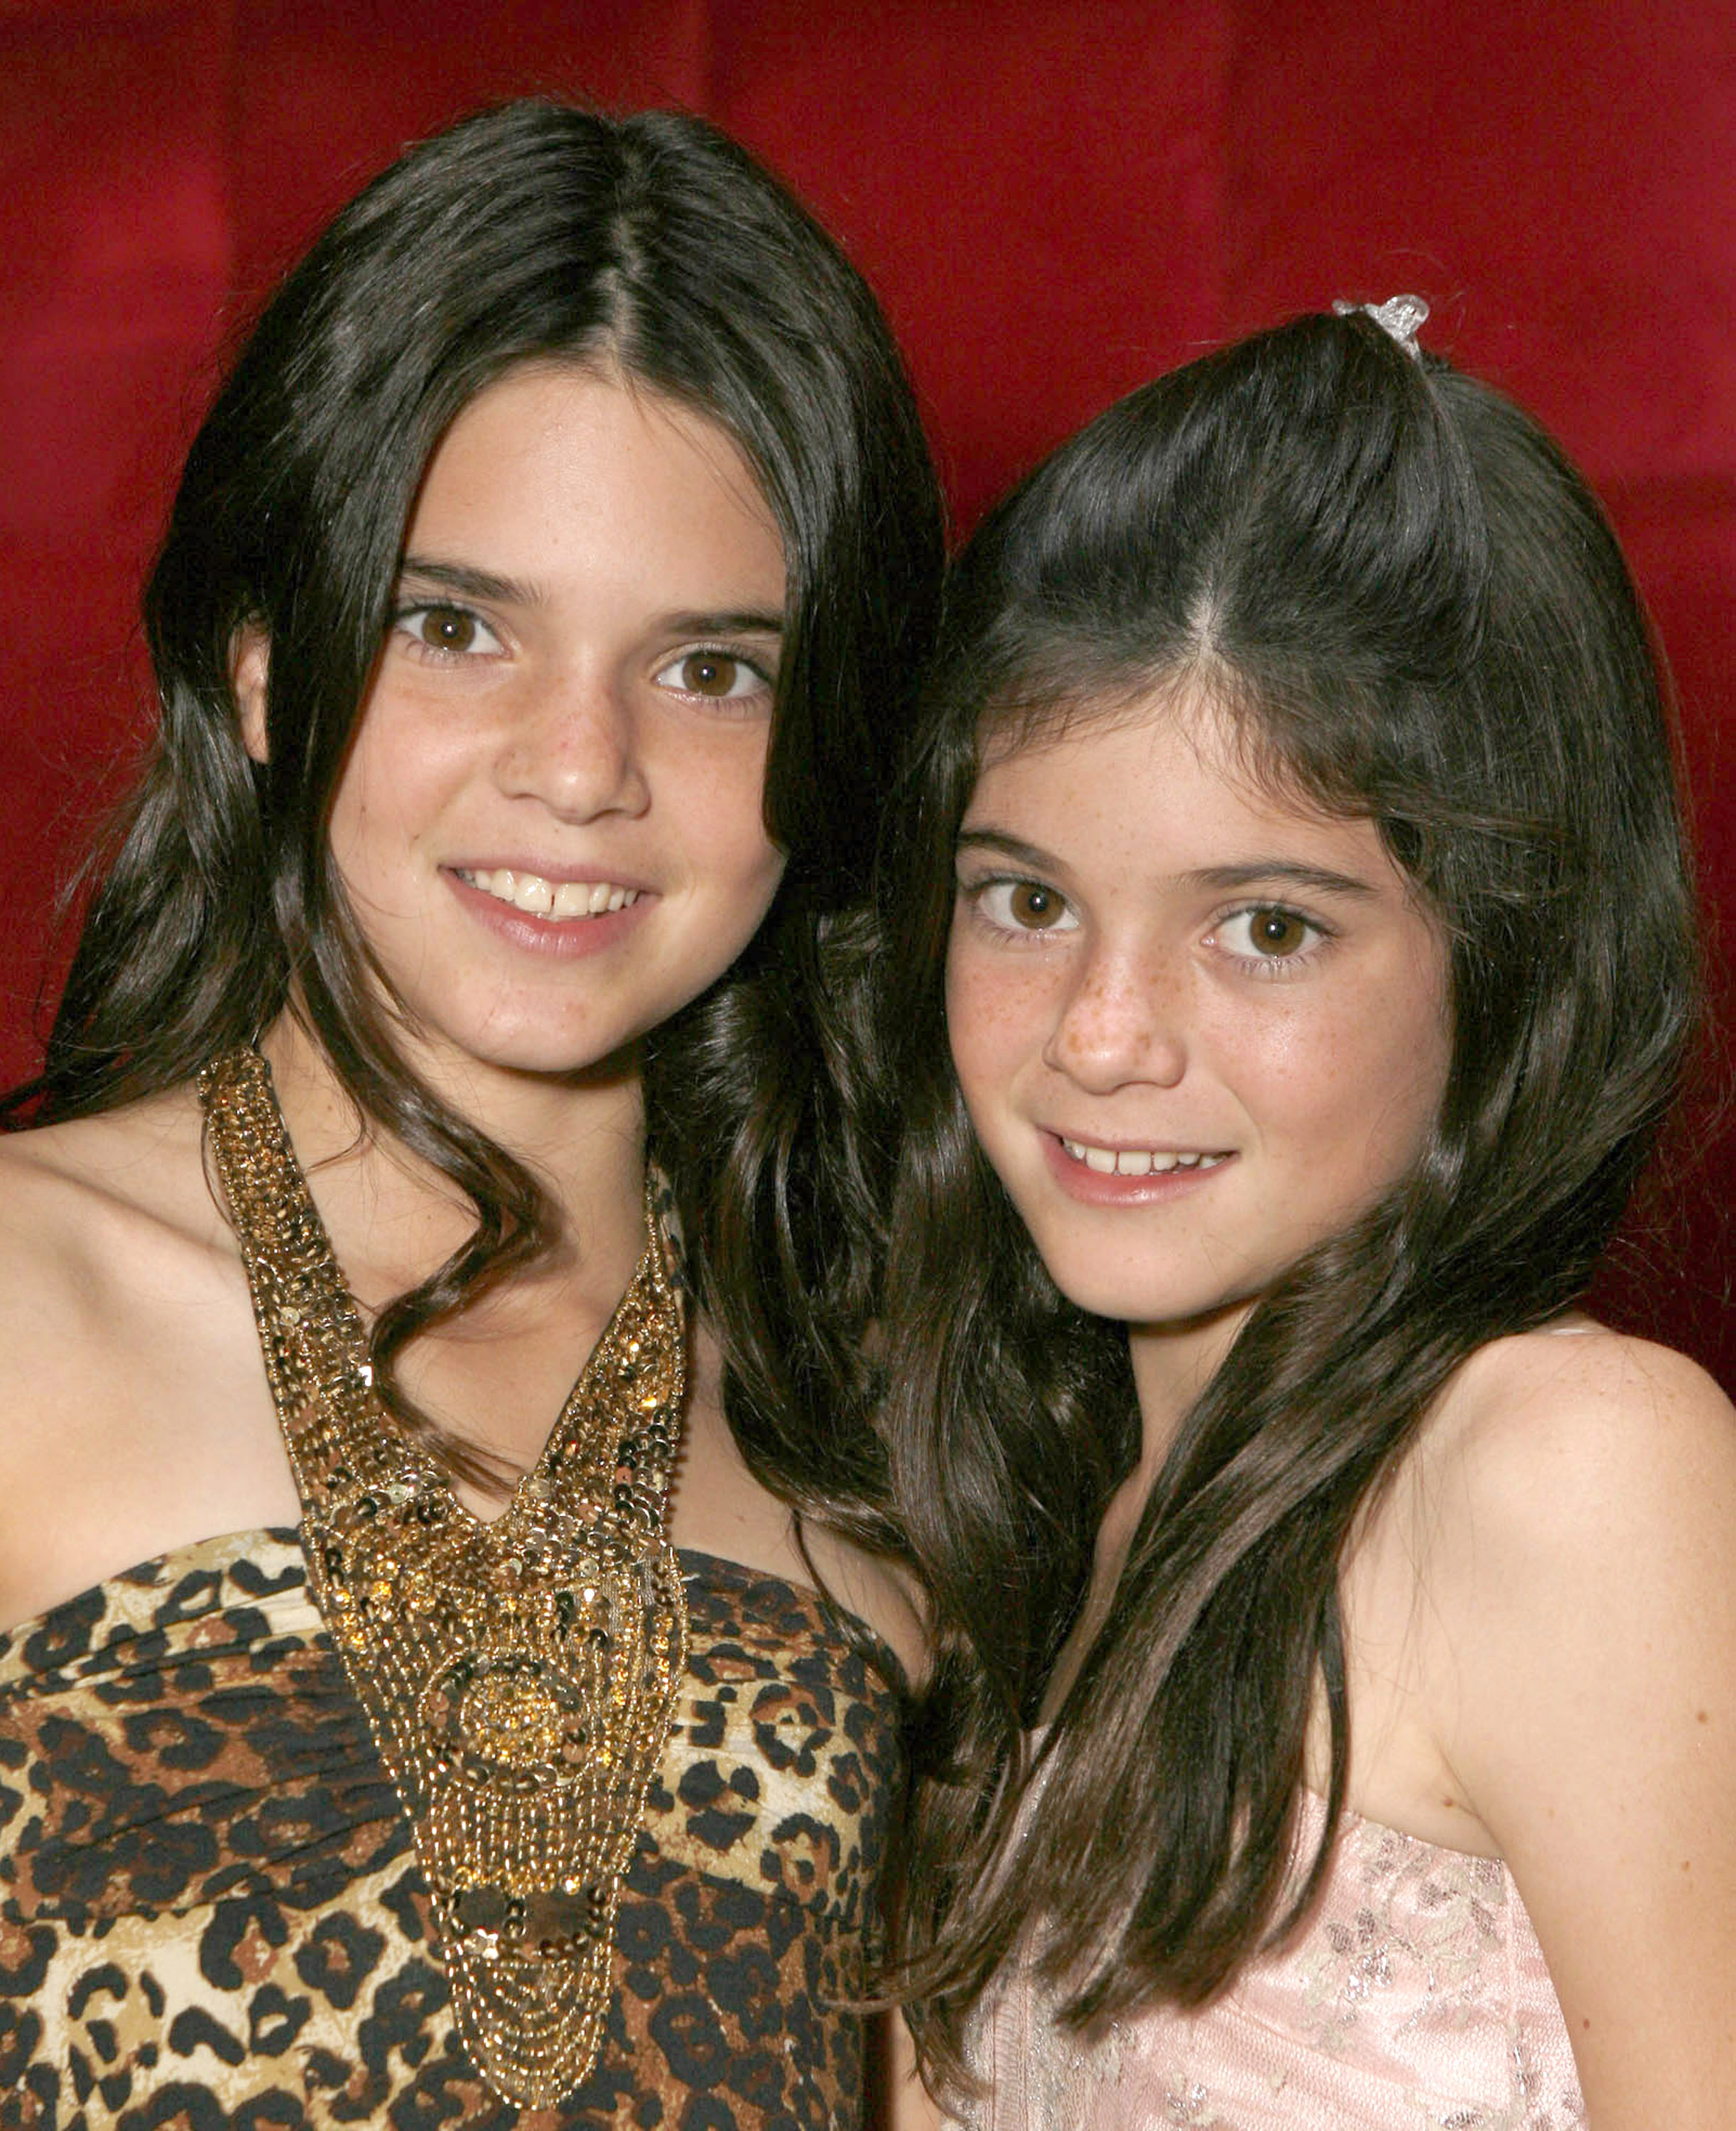 Kendall and Kylie Jenner at the "Keeping Up With the Kardashians" viewing party on October 16, 2007, in Agoura Hills, California. | Source: Getty Images